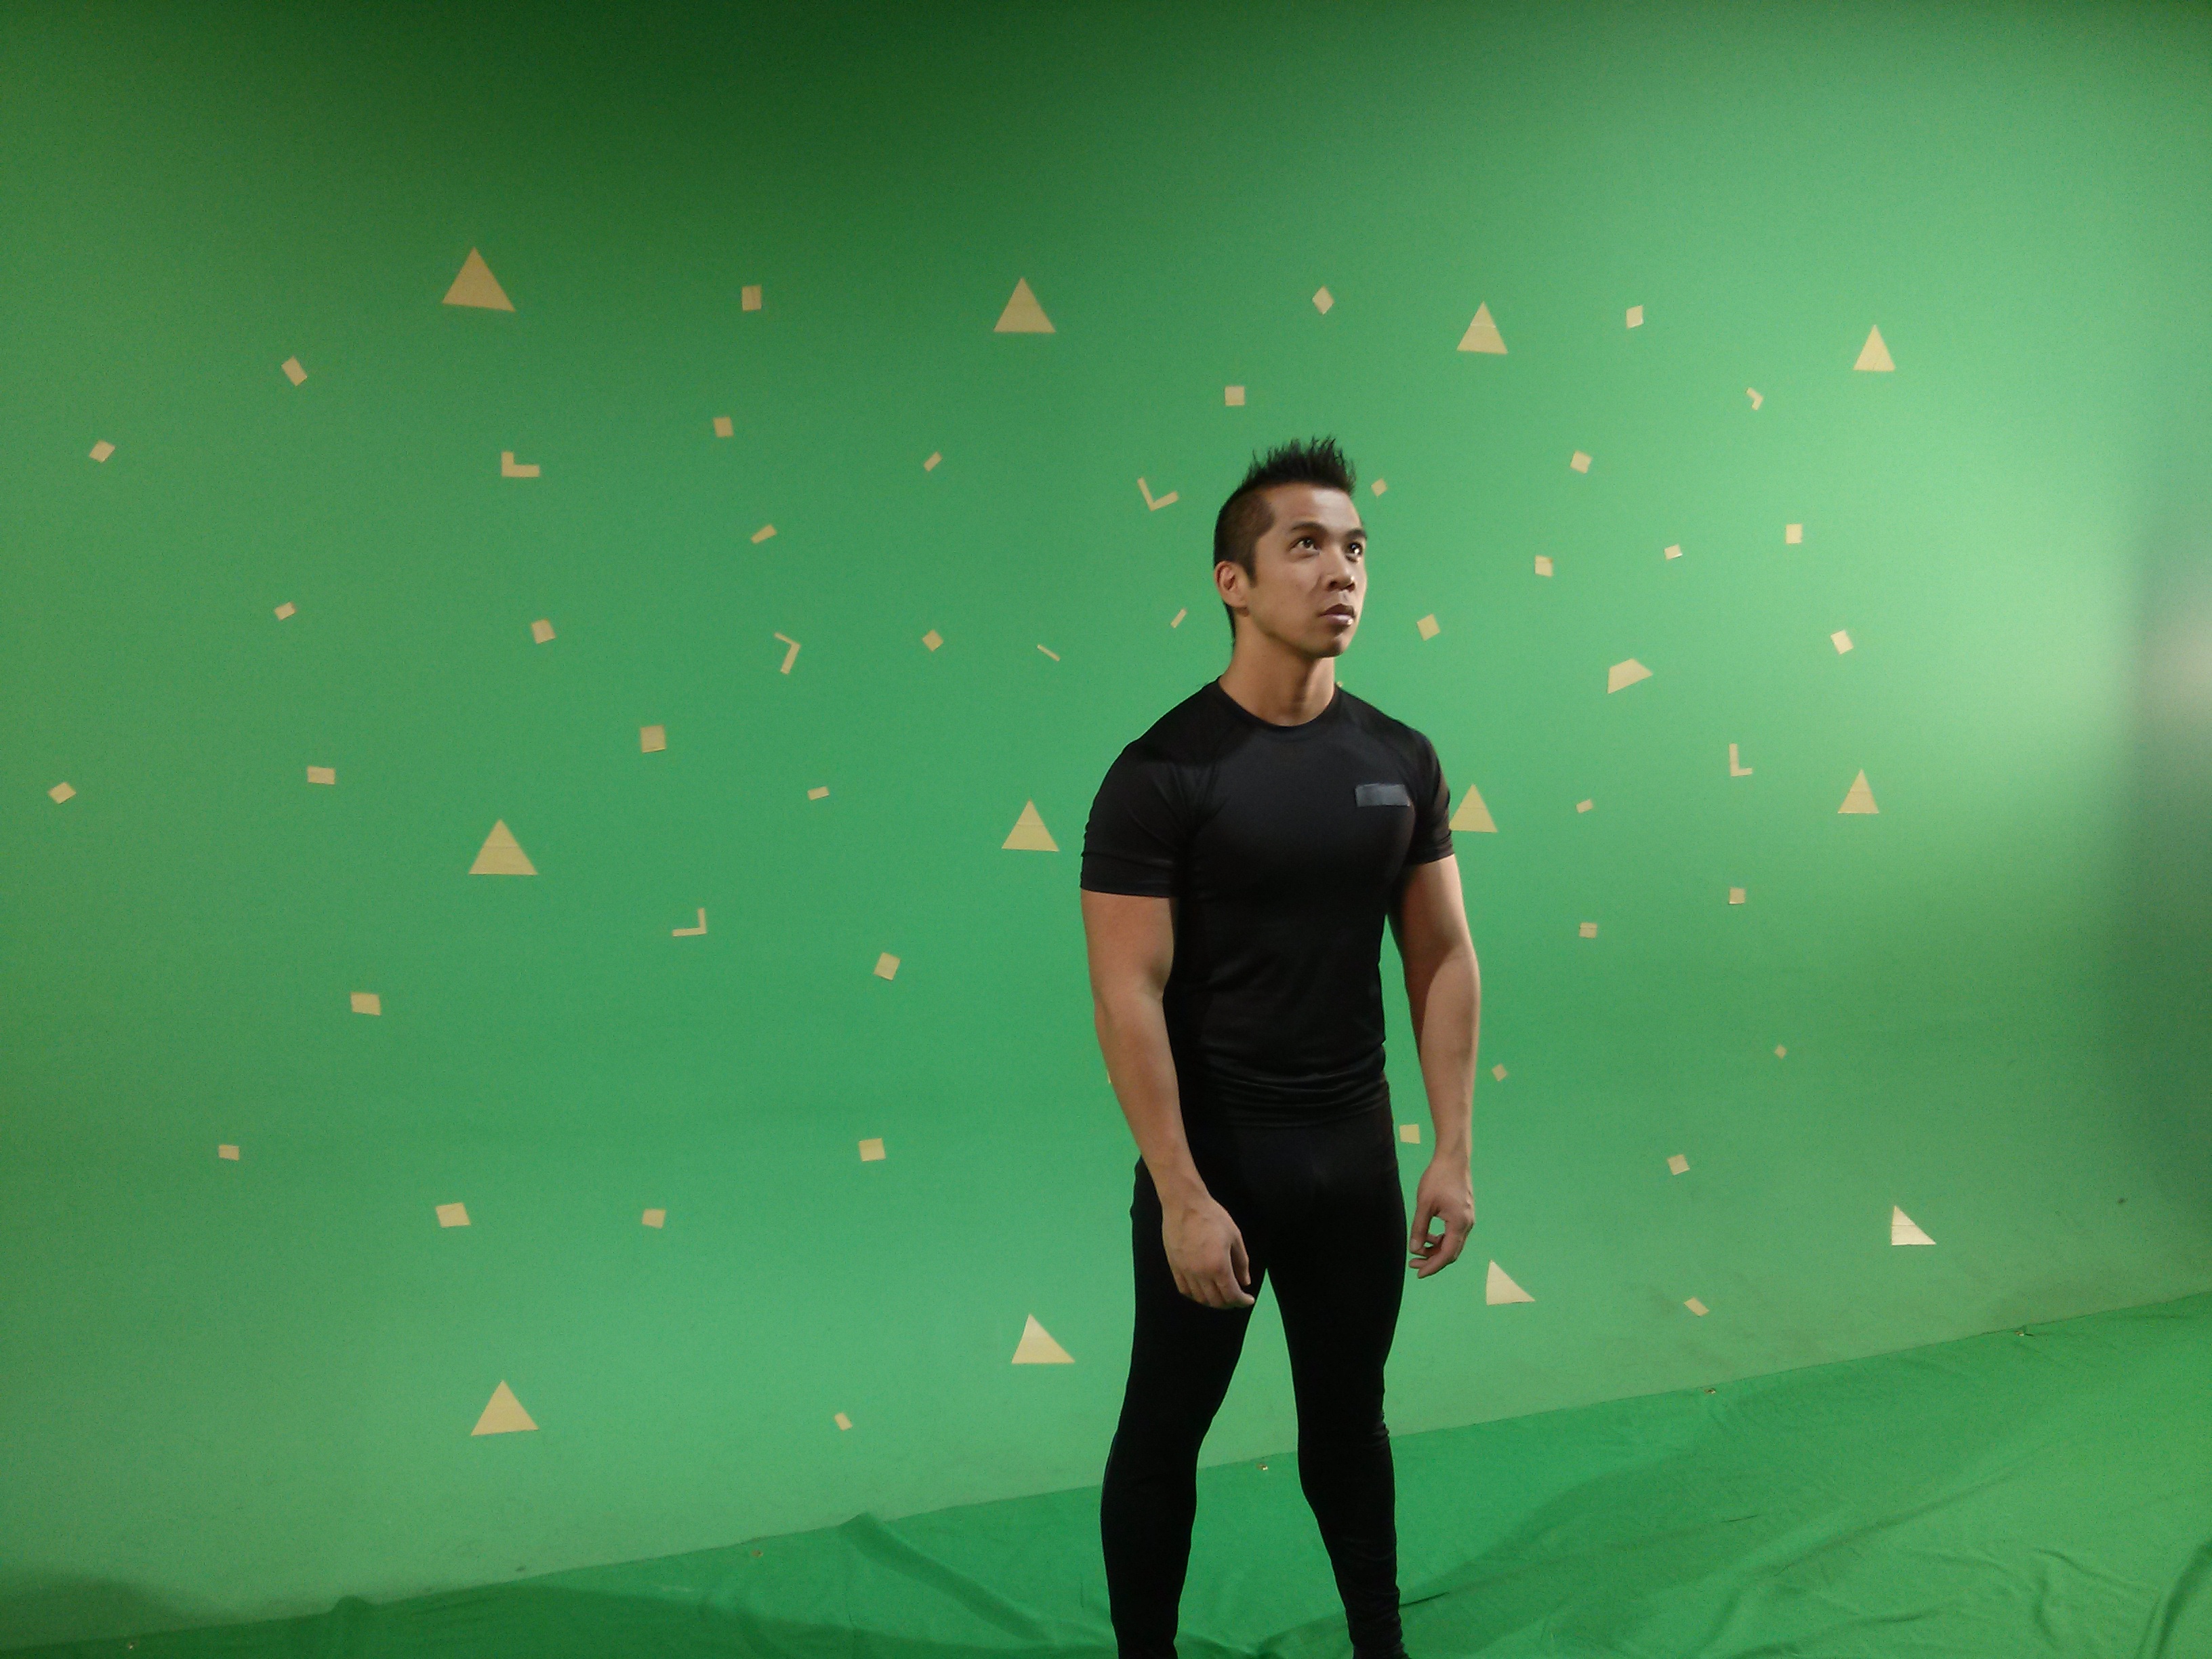 On set for some green screen work w/ vFX to be added later.